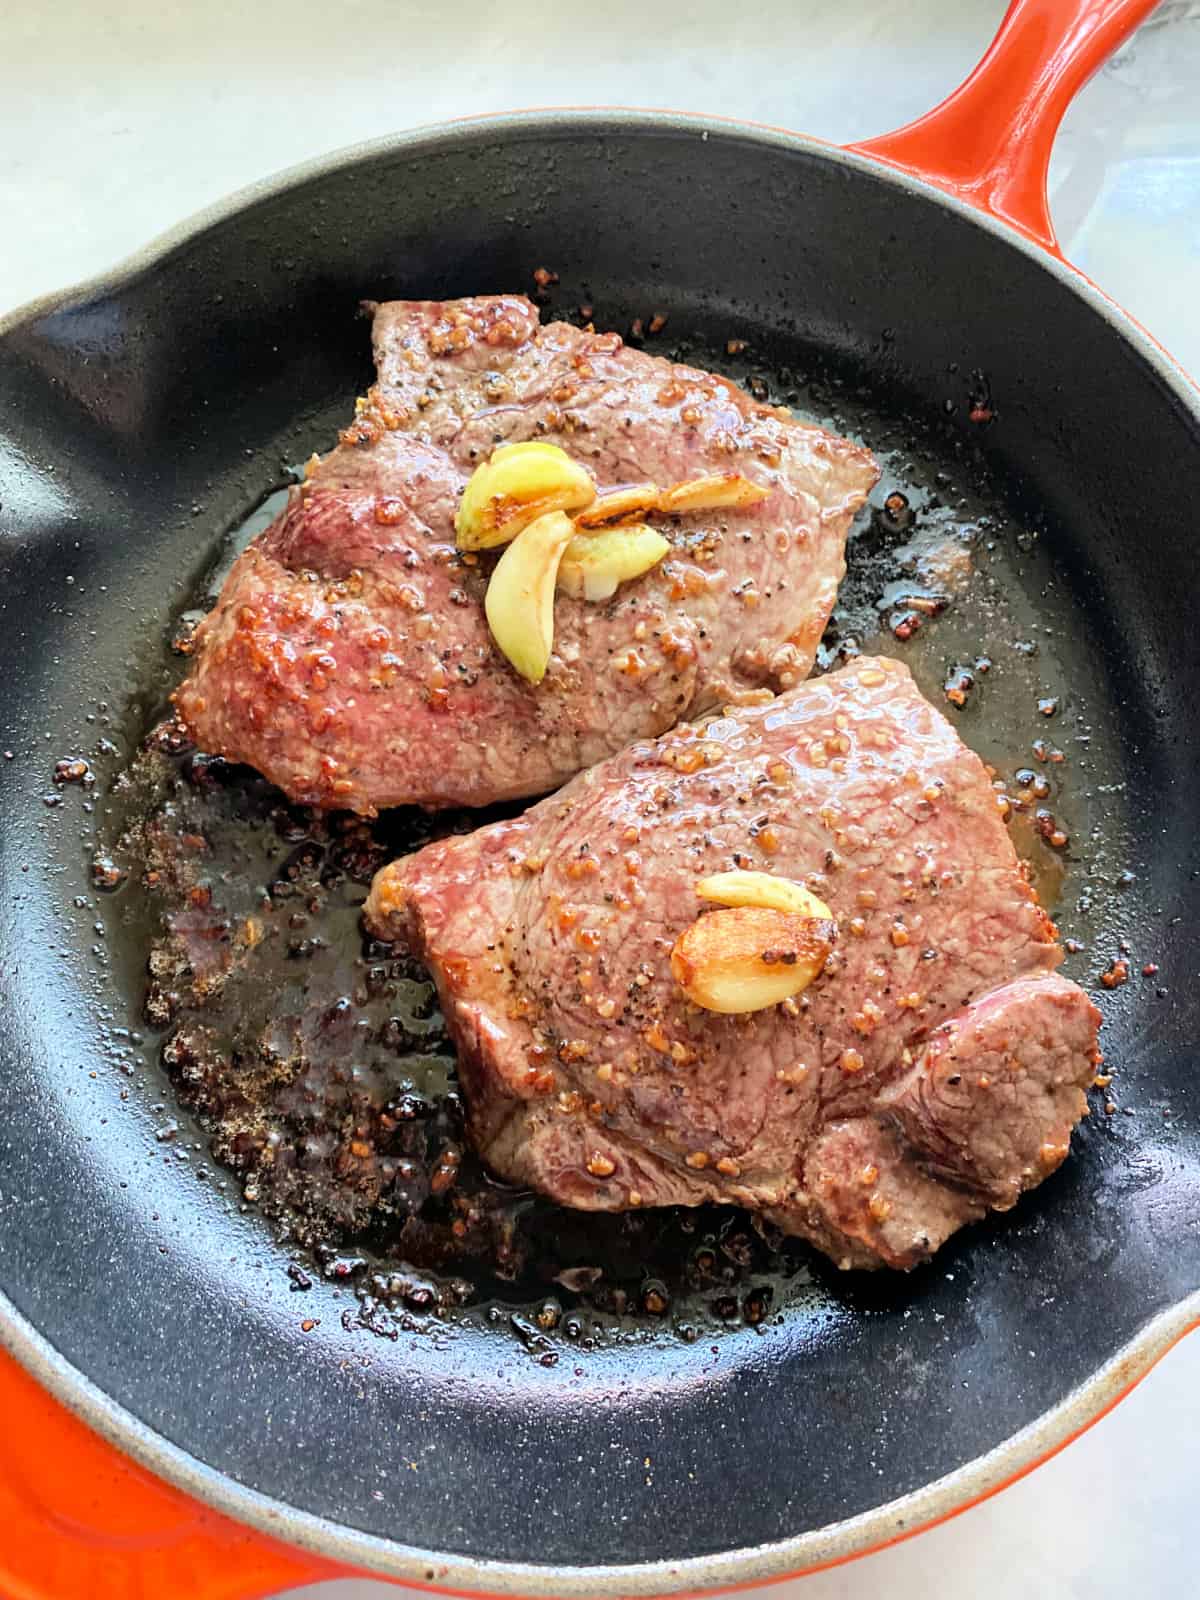 Two pieces of steak seared on a skillet with garlic on top.